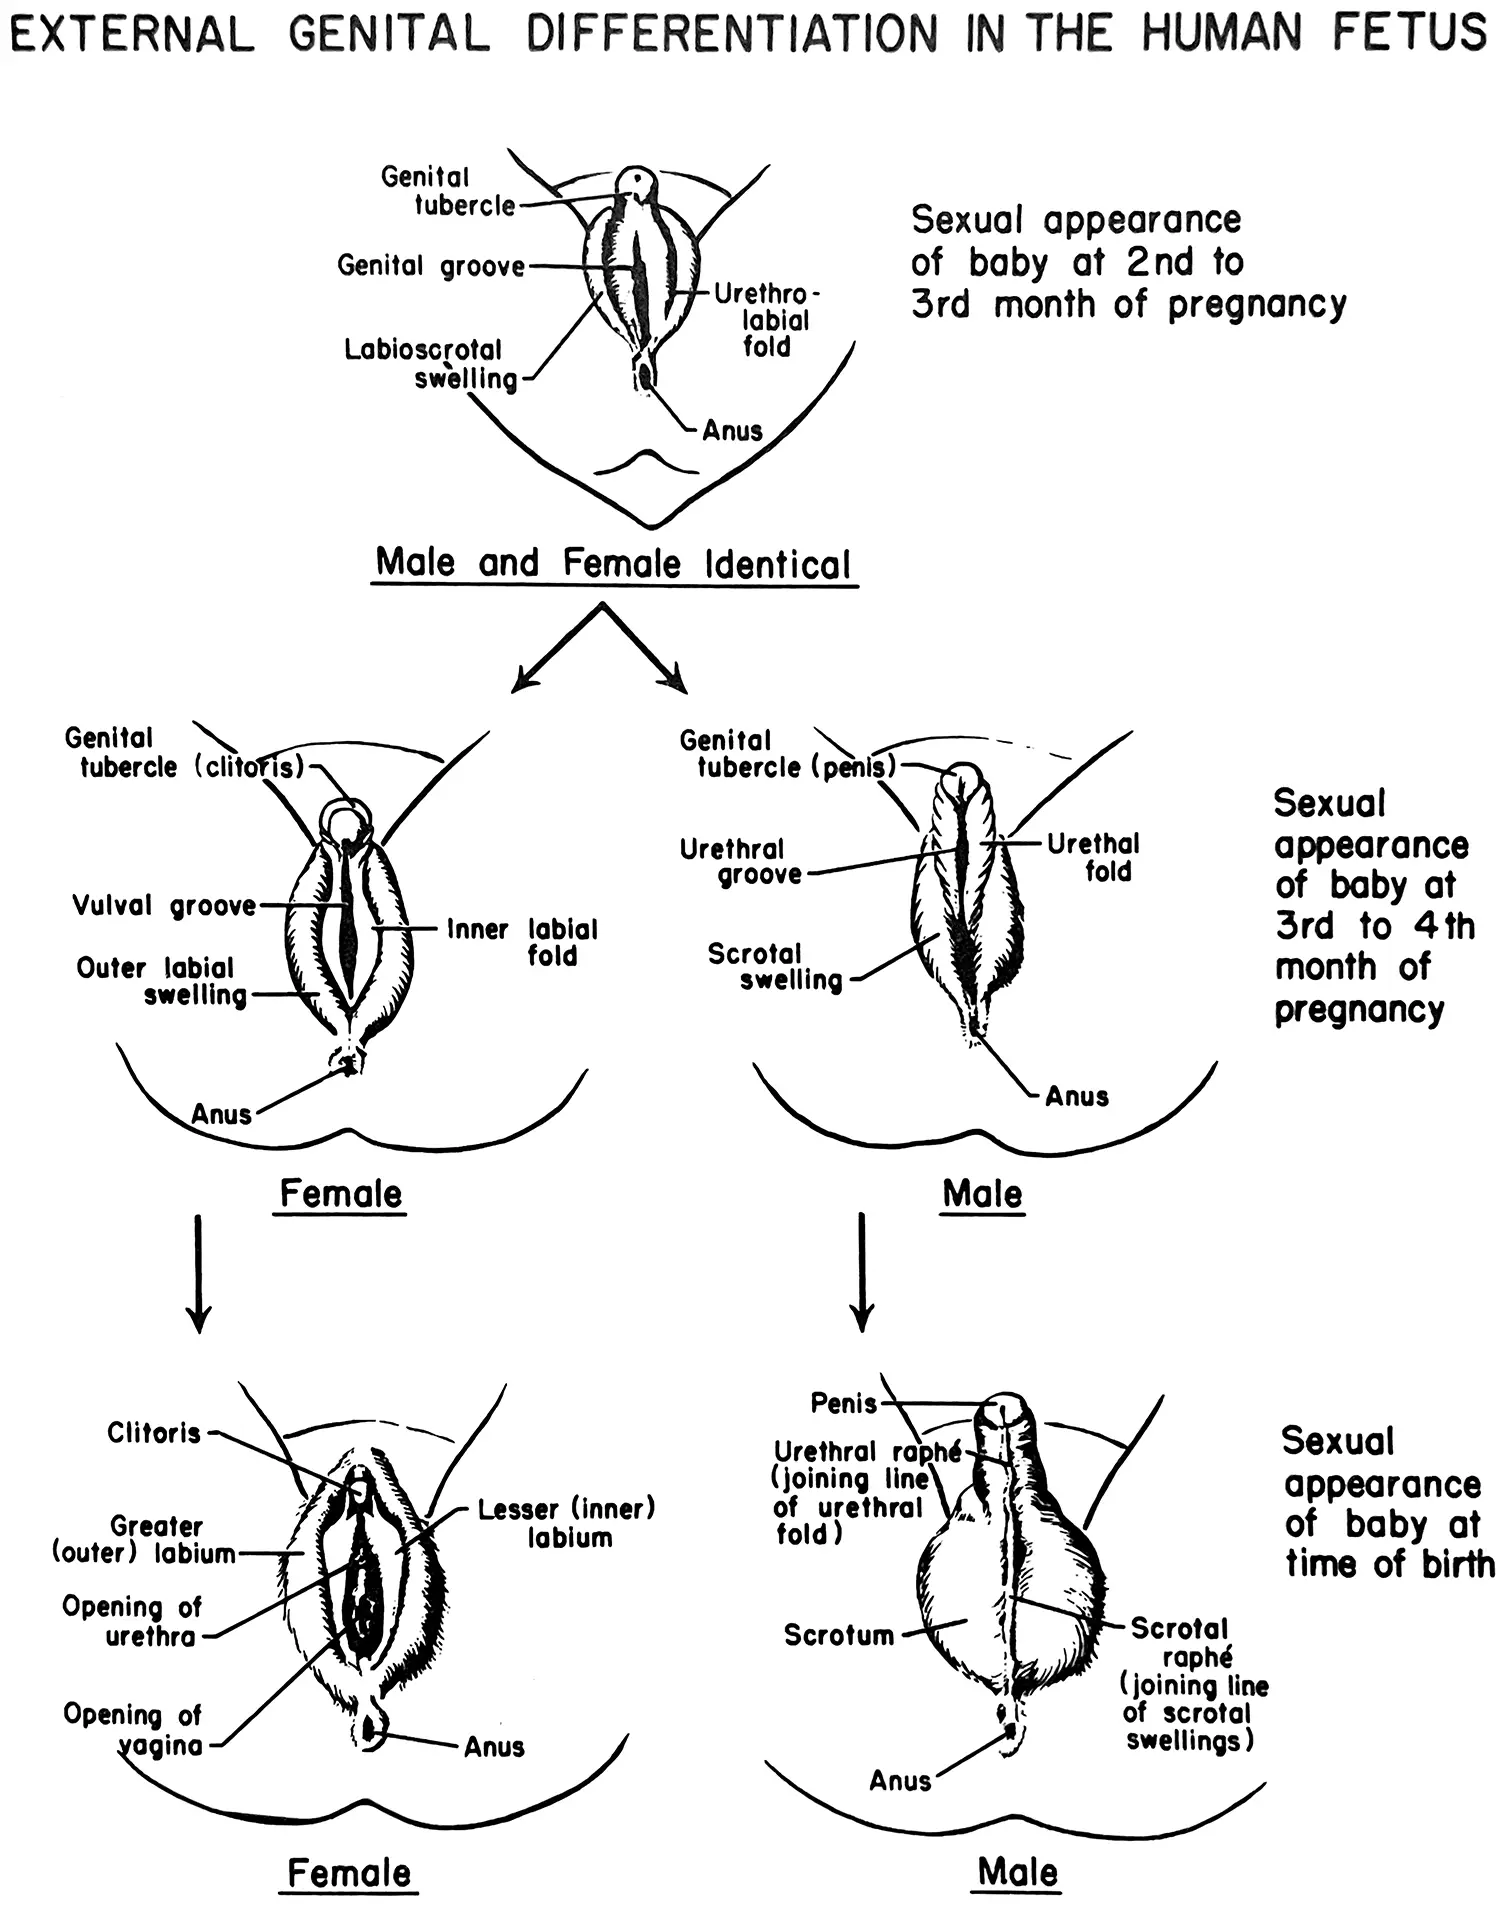 A detailed medical diagram shows three stages of differentiation of a baby’s external genital organs. It shows how there is a common sexual appearance of the baby at the second to third month of pregnancy which then starts to differentiate (between a vulval groove and urethral groove) at the third to fourth month of pregnancy to finally the fully formed external genital organs at the time of birth. 